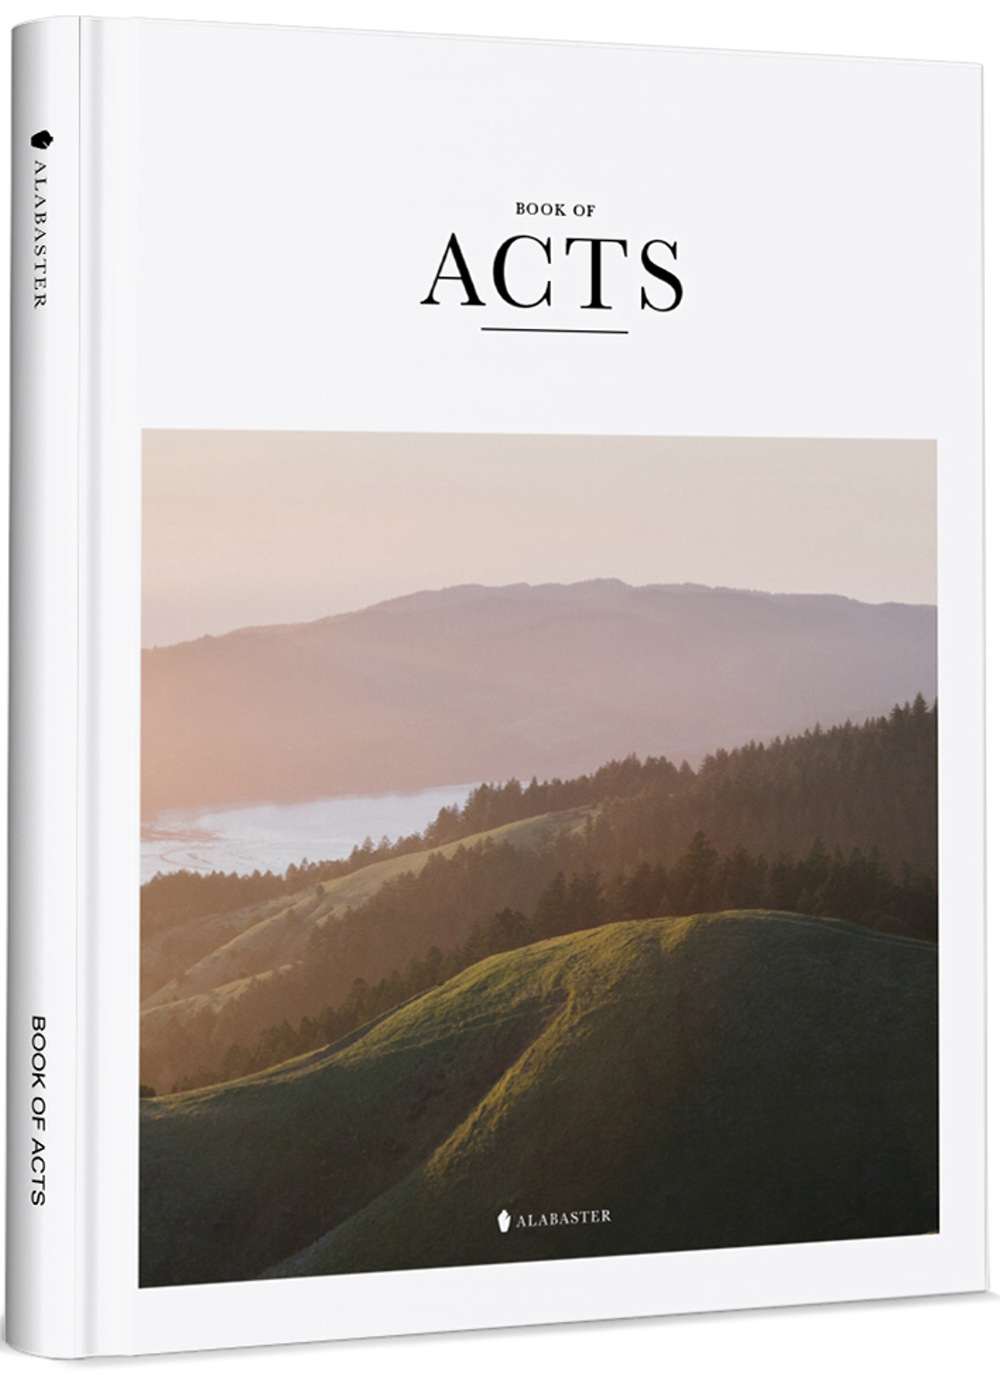 BOOK OF ACTS(New Living Translation)(Hardcover)